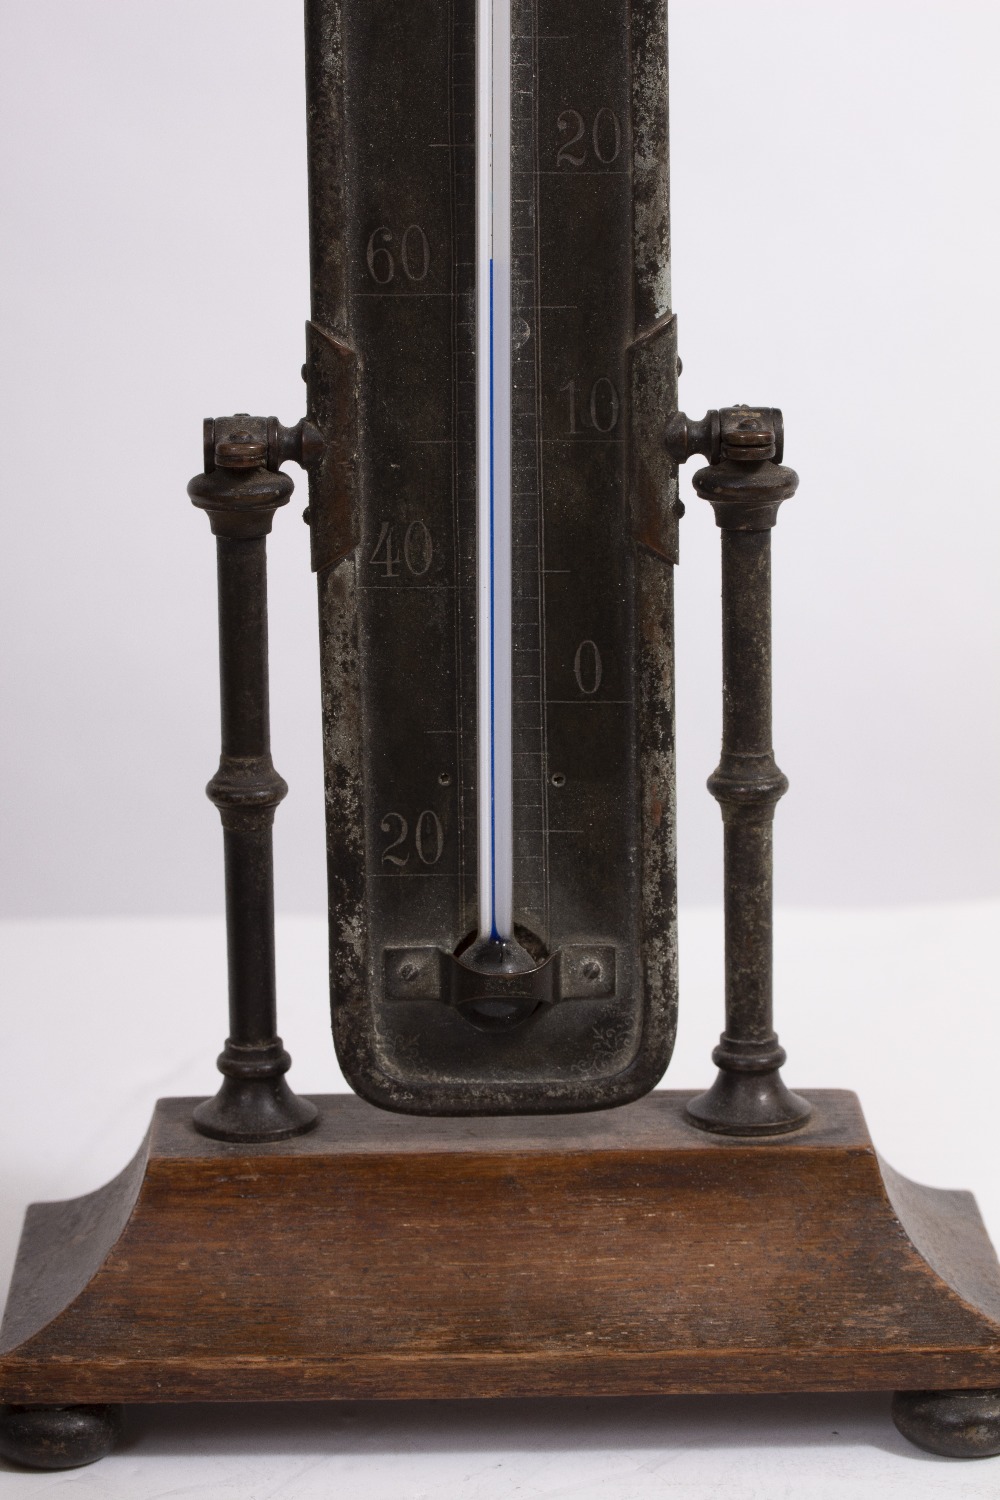 A LARGE SIZE DESK THERMOMETER the scale in fahrenheit and celsius with hinged turned supports and - Image 3 of 6